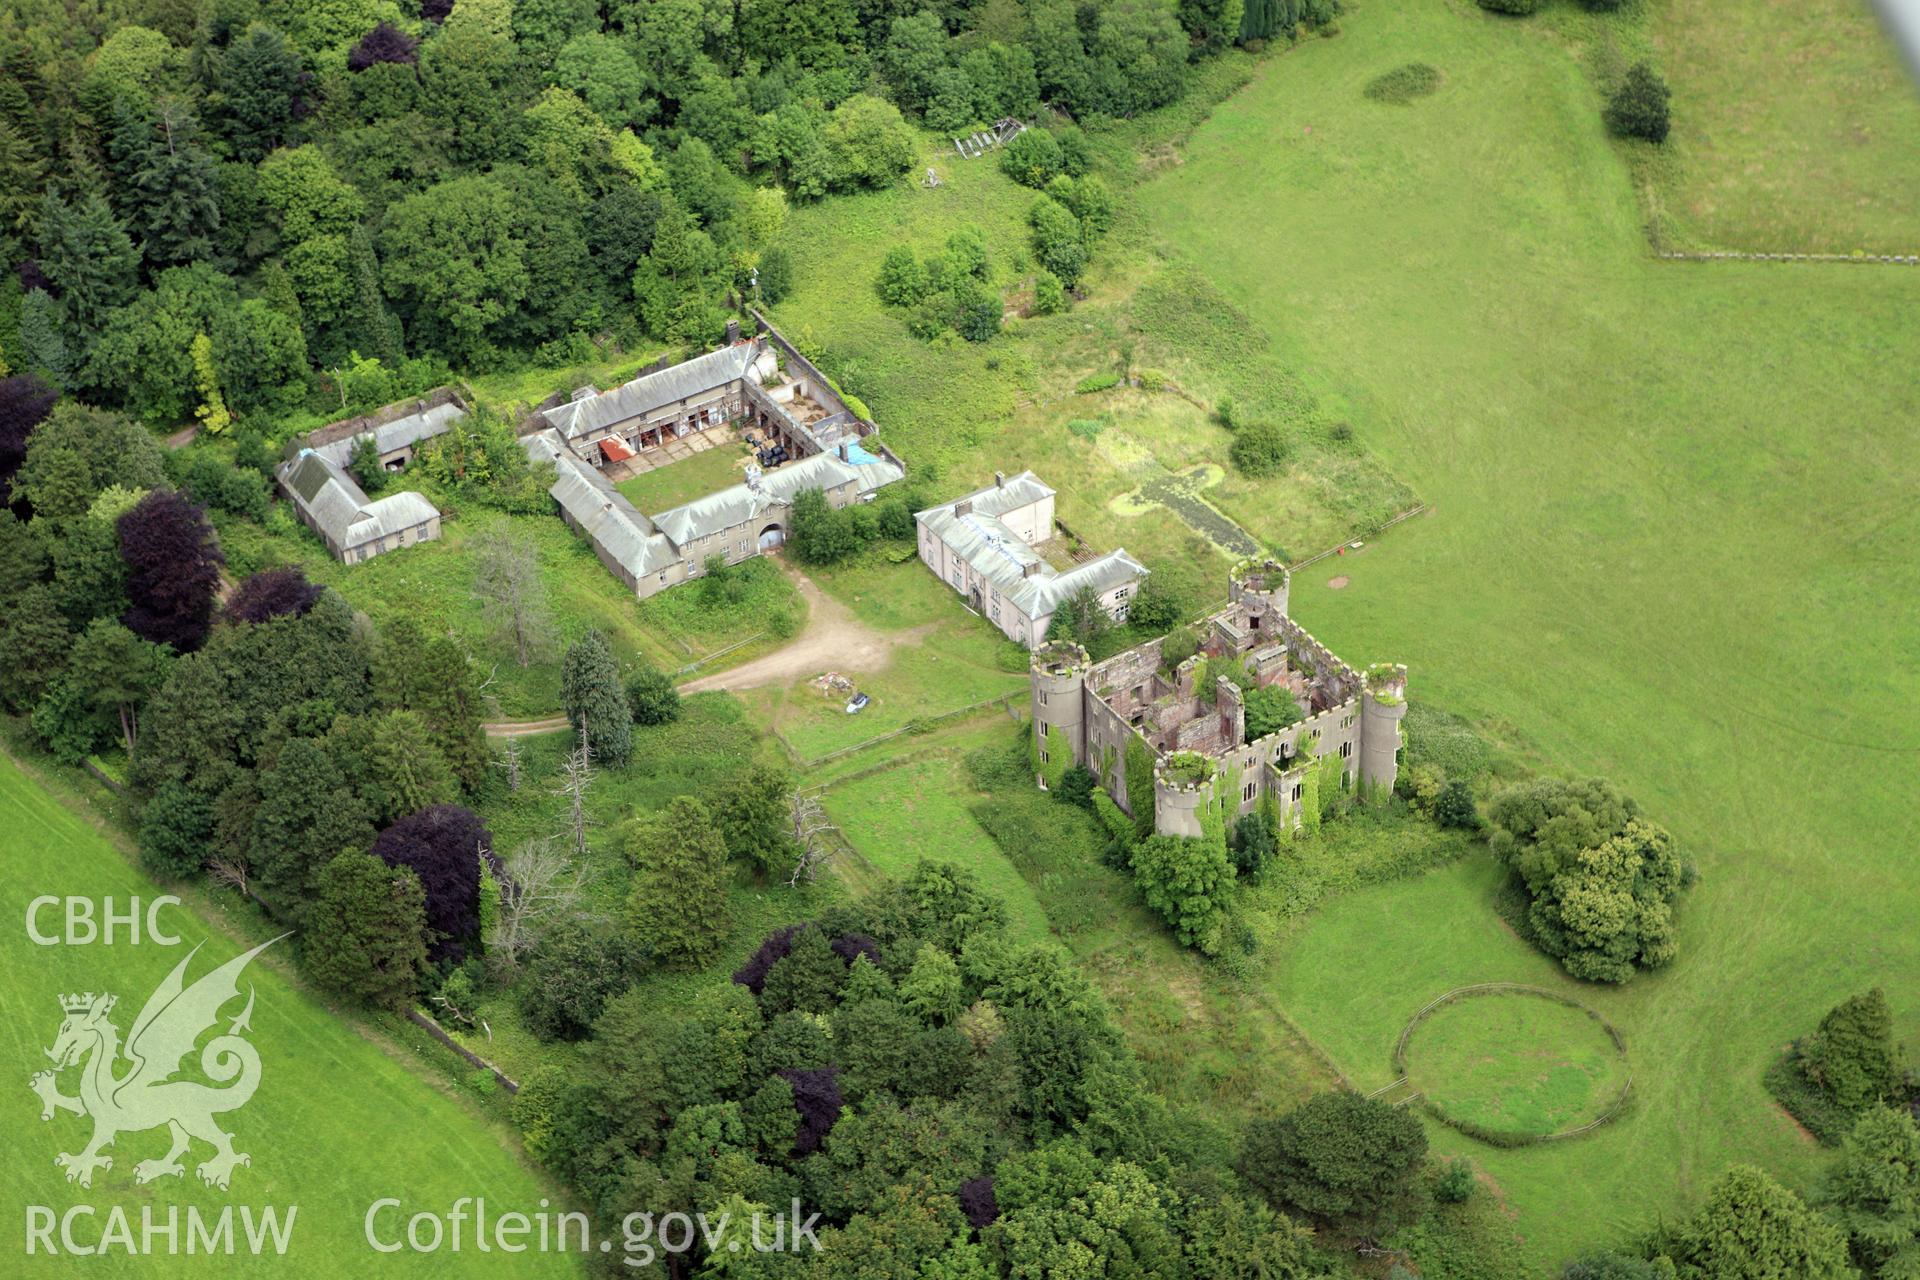 RCAHMW colour oblique aerial photograph of Ruperra Castle. Taken on 09 July 2009 by Toby Driver